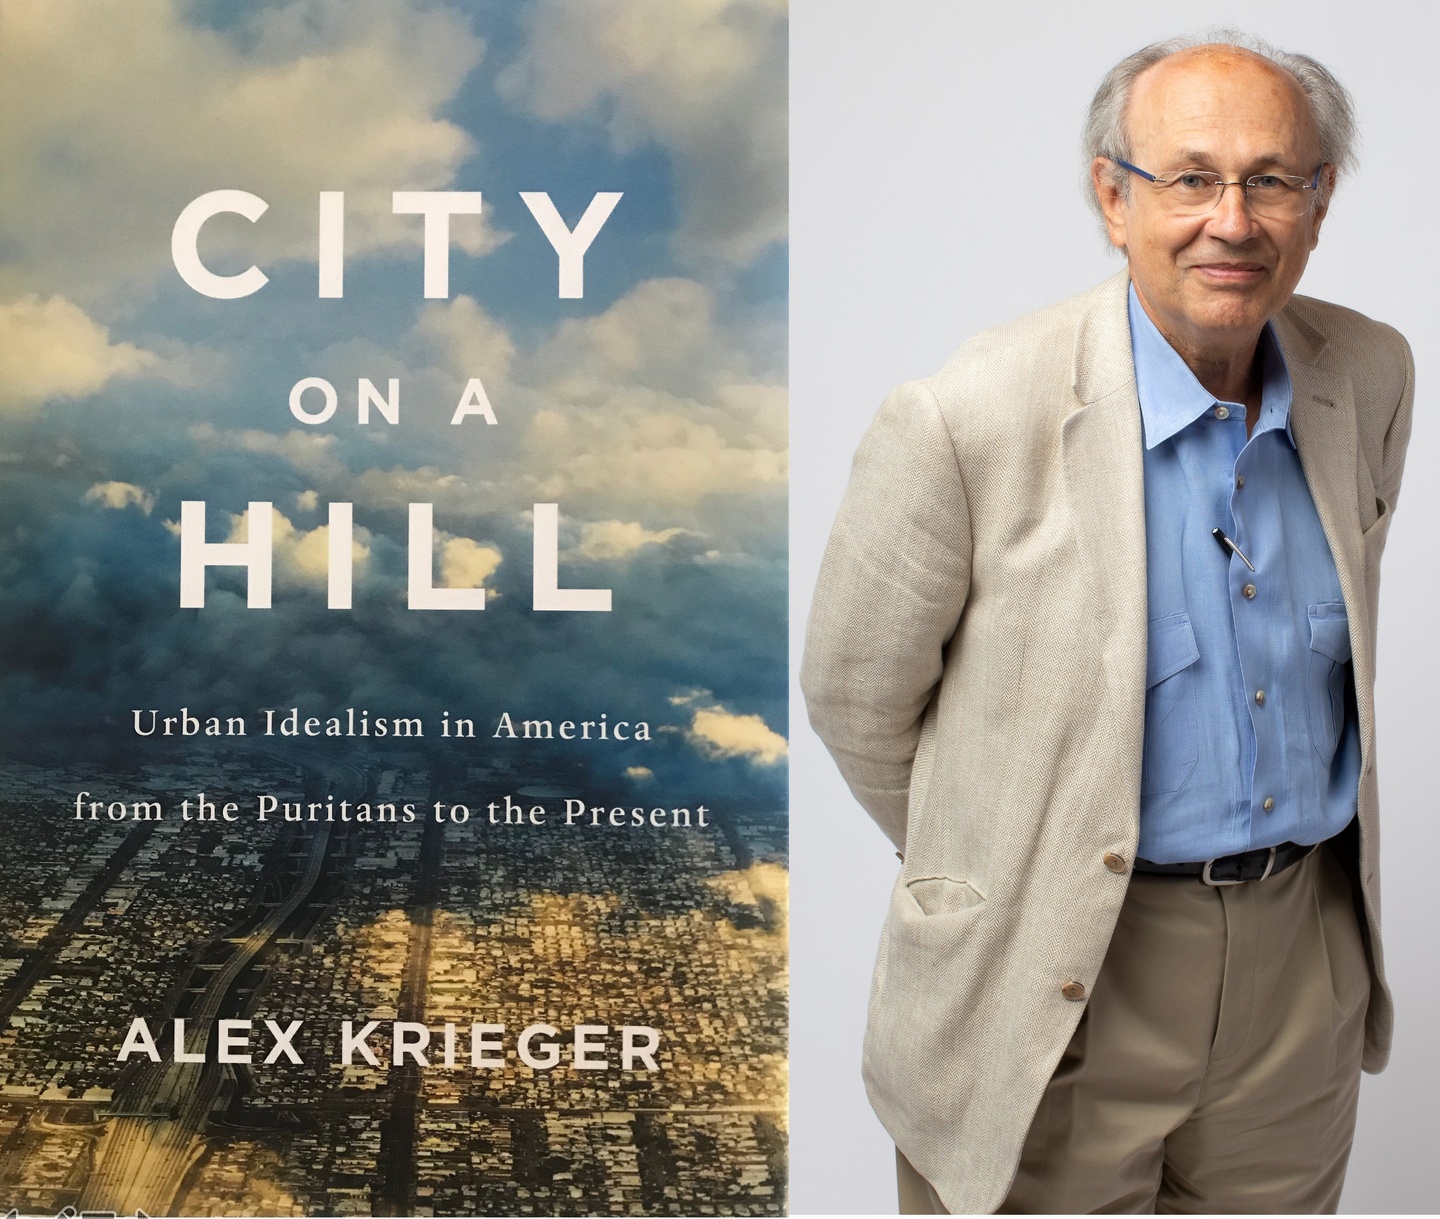 Dual-panel image; on the left is the cover of Alex Krieger's book *City on a Hill*, and on the right is a portrait photo of Krieger standing.